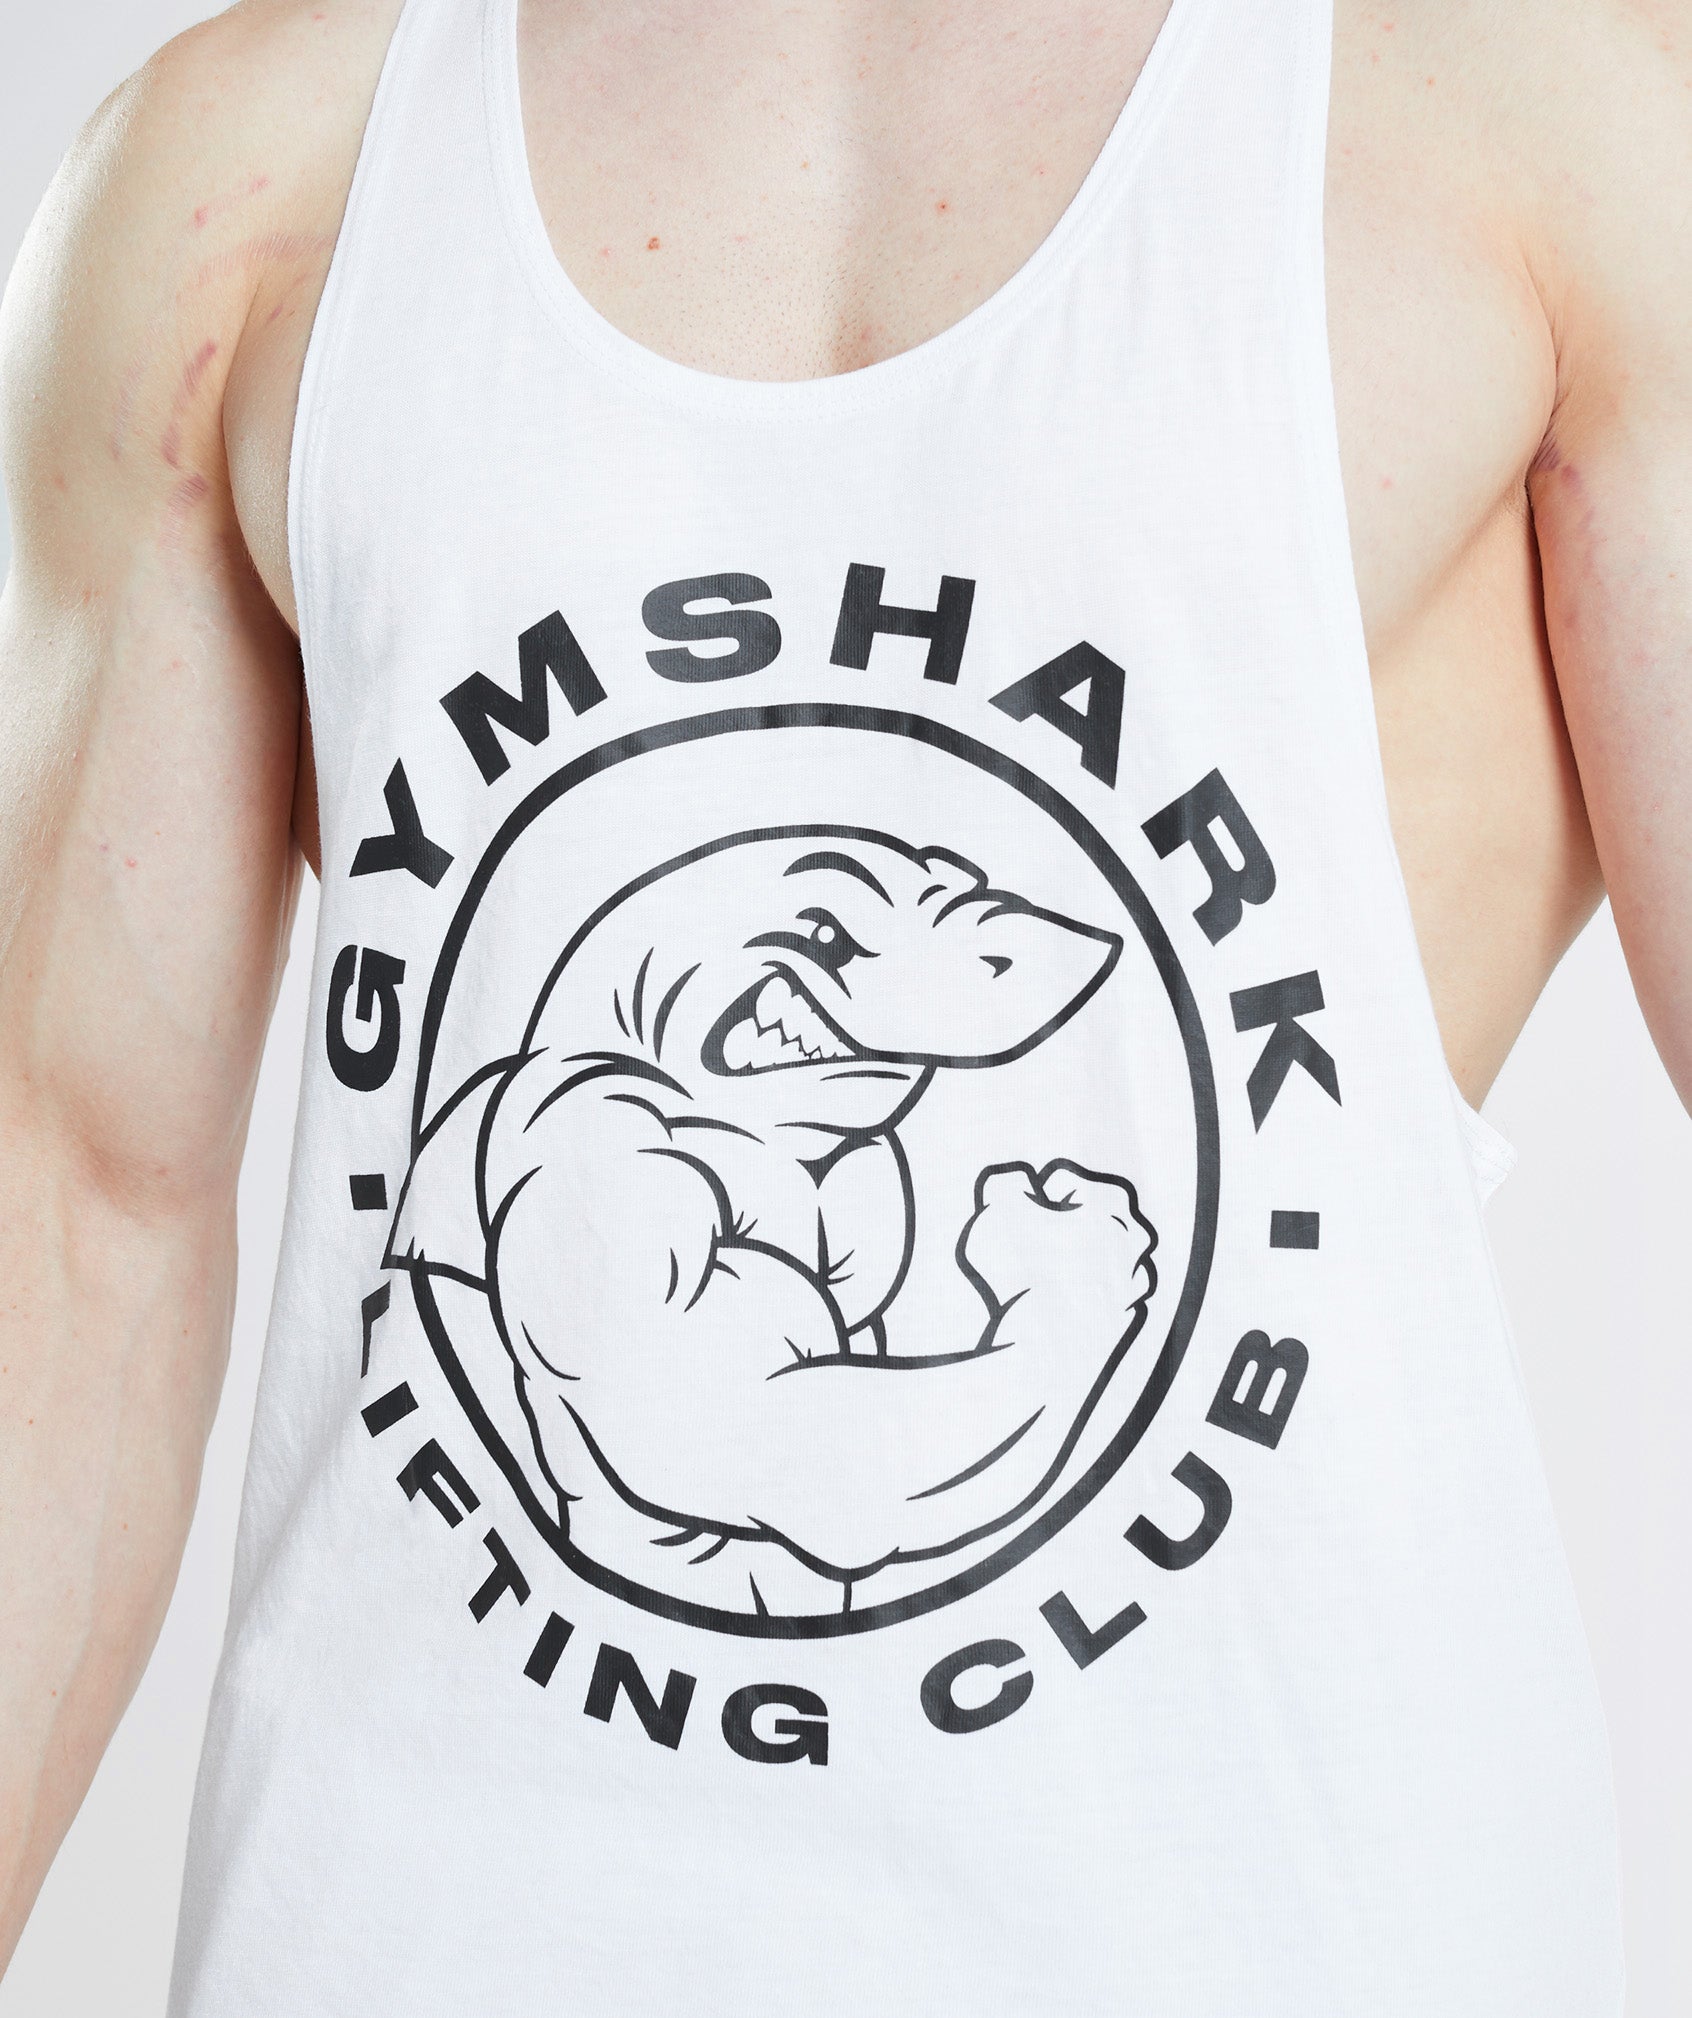 Stringers - Gymshark Products For Sale - Mcvallescrivia